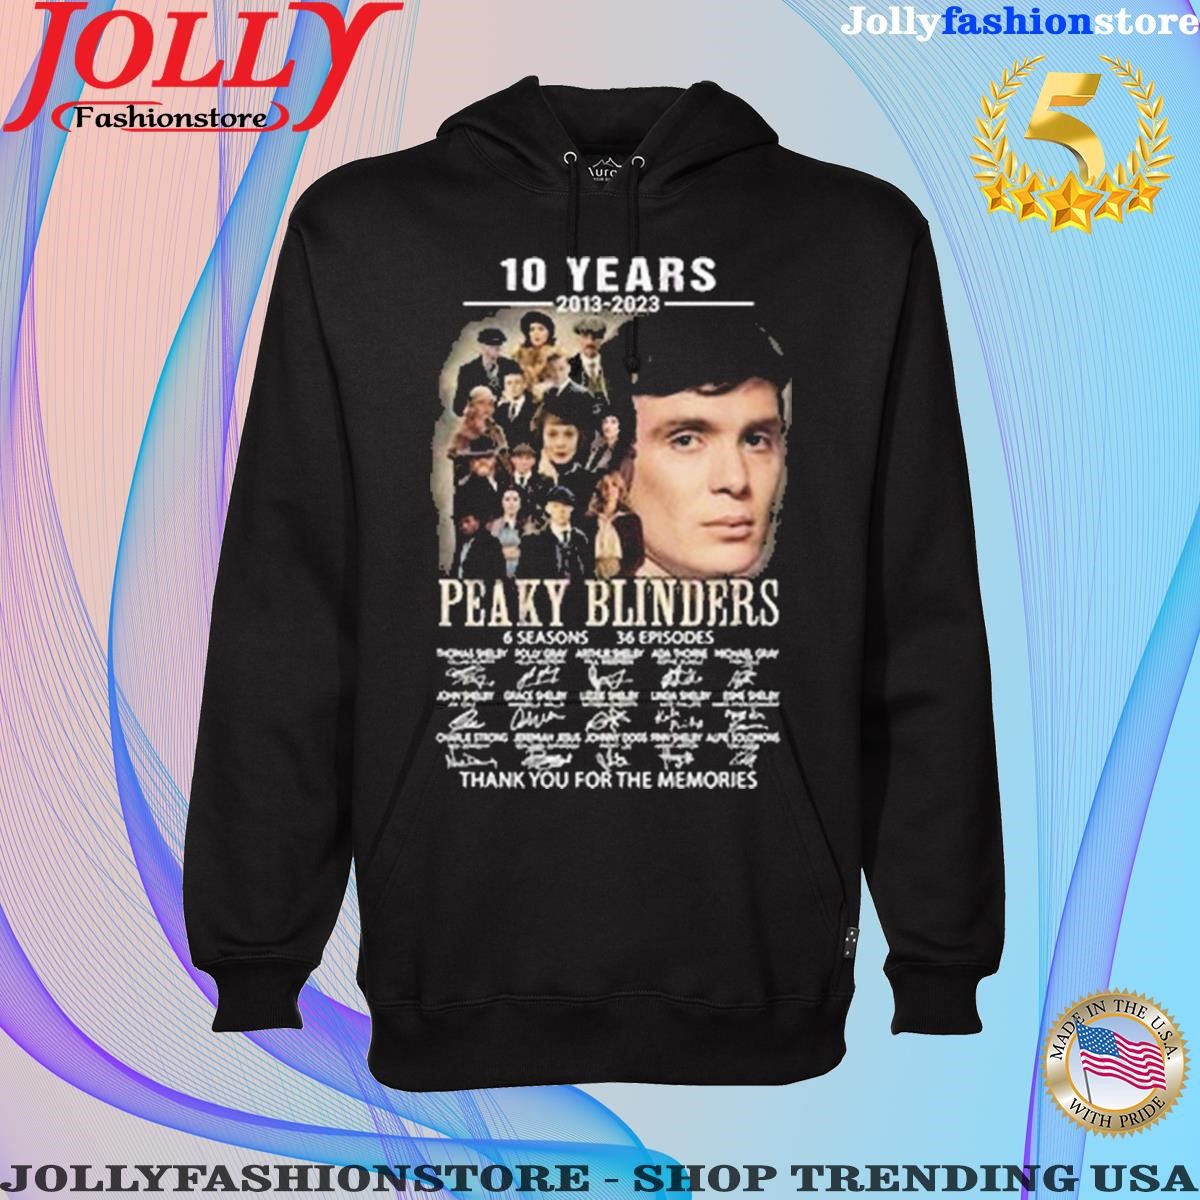 10 years 2013 202 peaky blinders 6 season 36 episodes thank you for the memories signatures Shirt Hoodie shirt.png